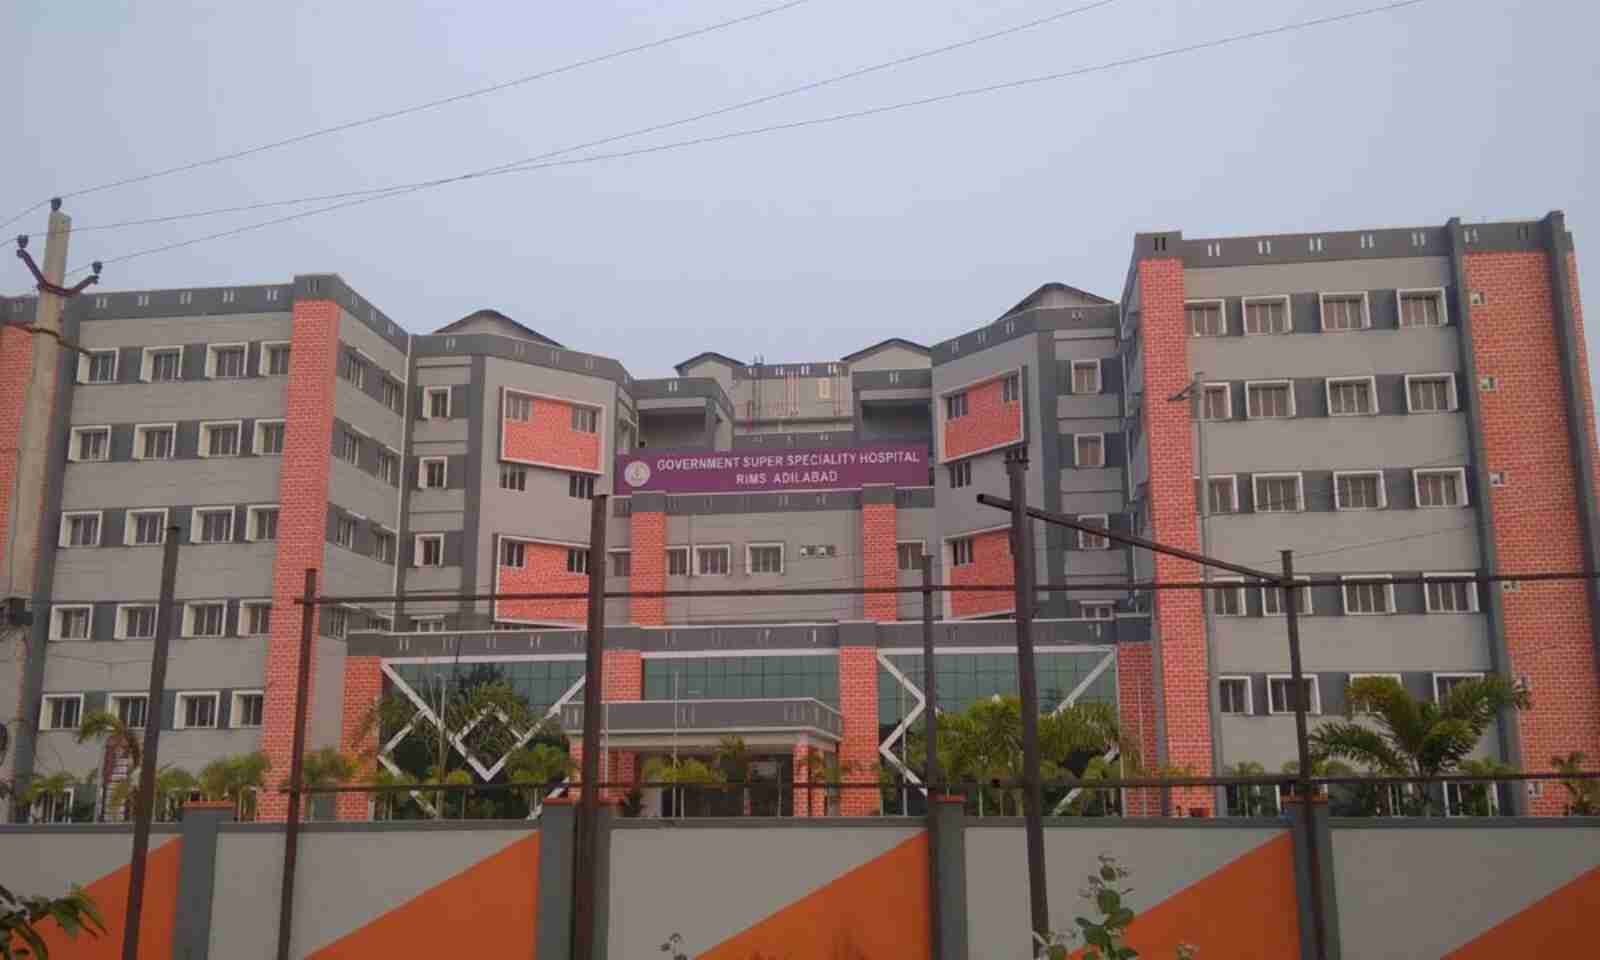 The super specialty hospital that has no doctors